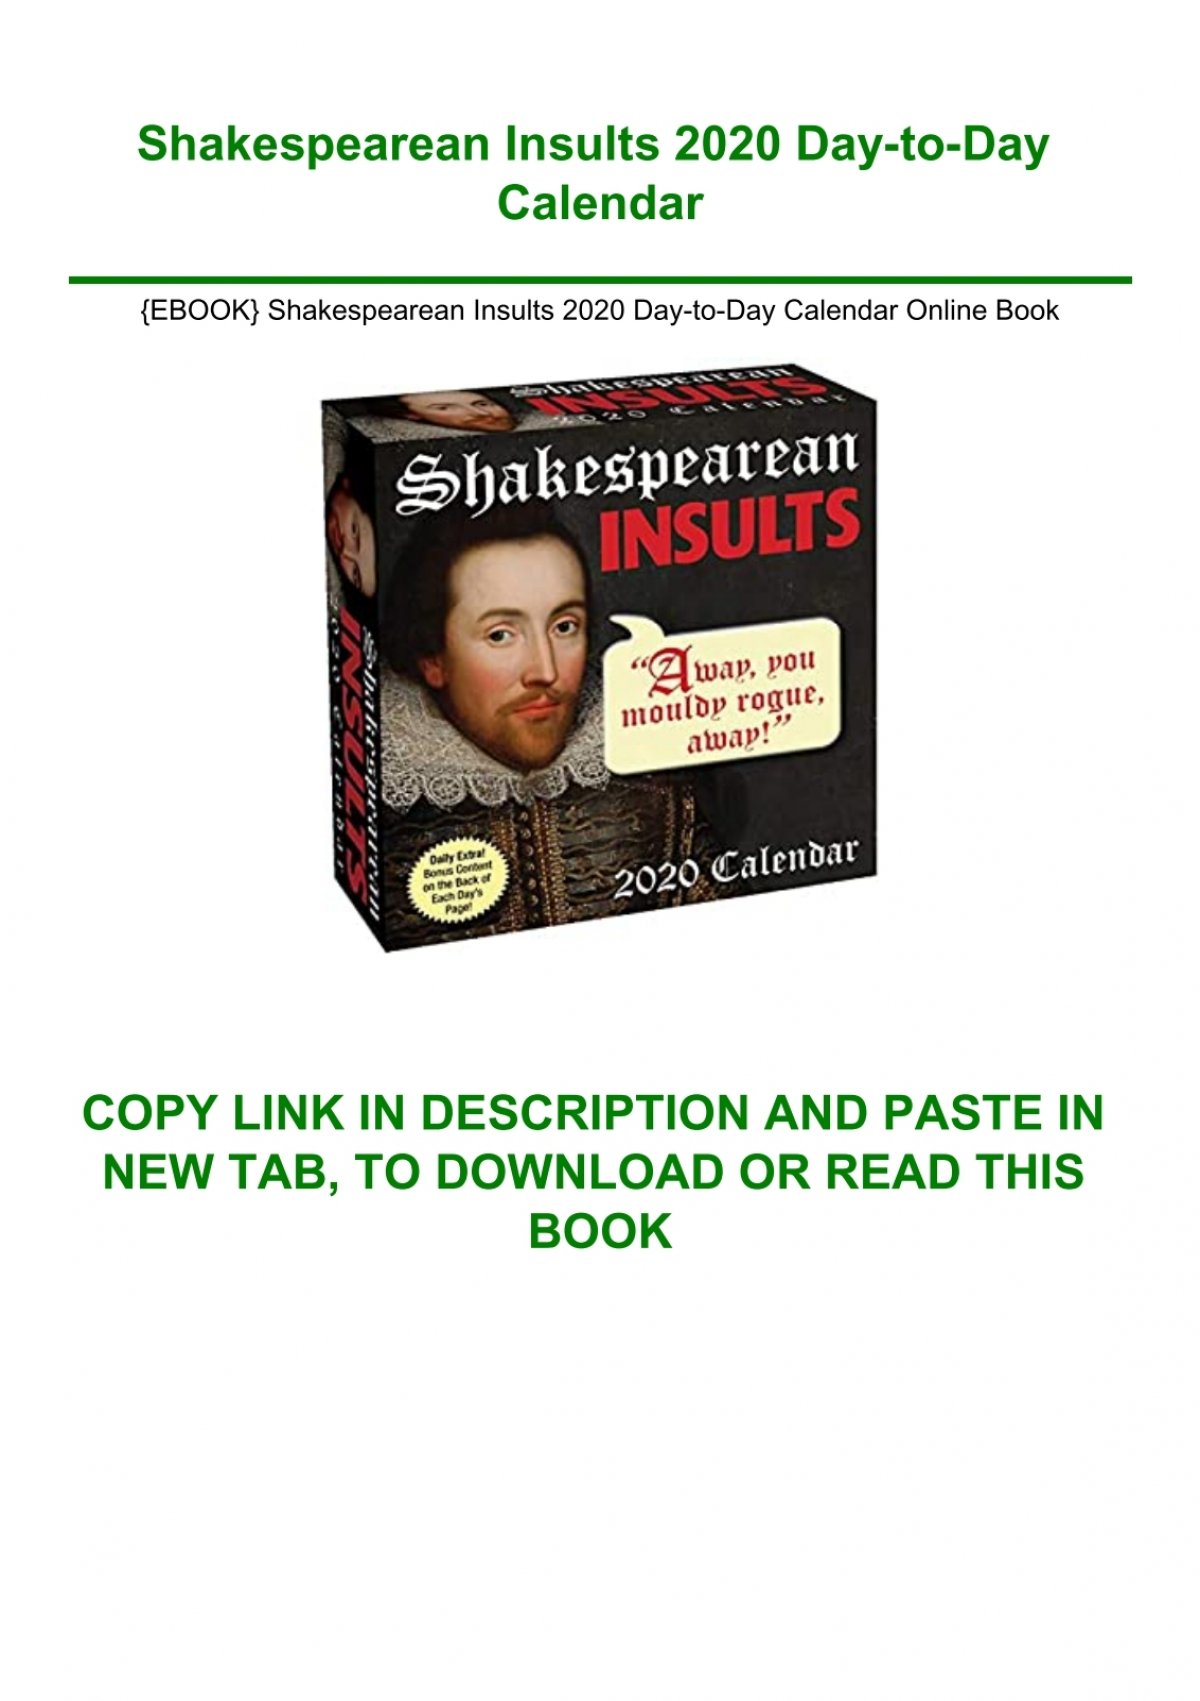 {EBOOK} Shakespearean Insults 2020 Day to Day Calendar Online Book